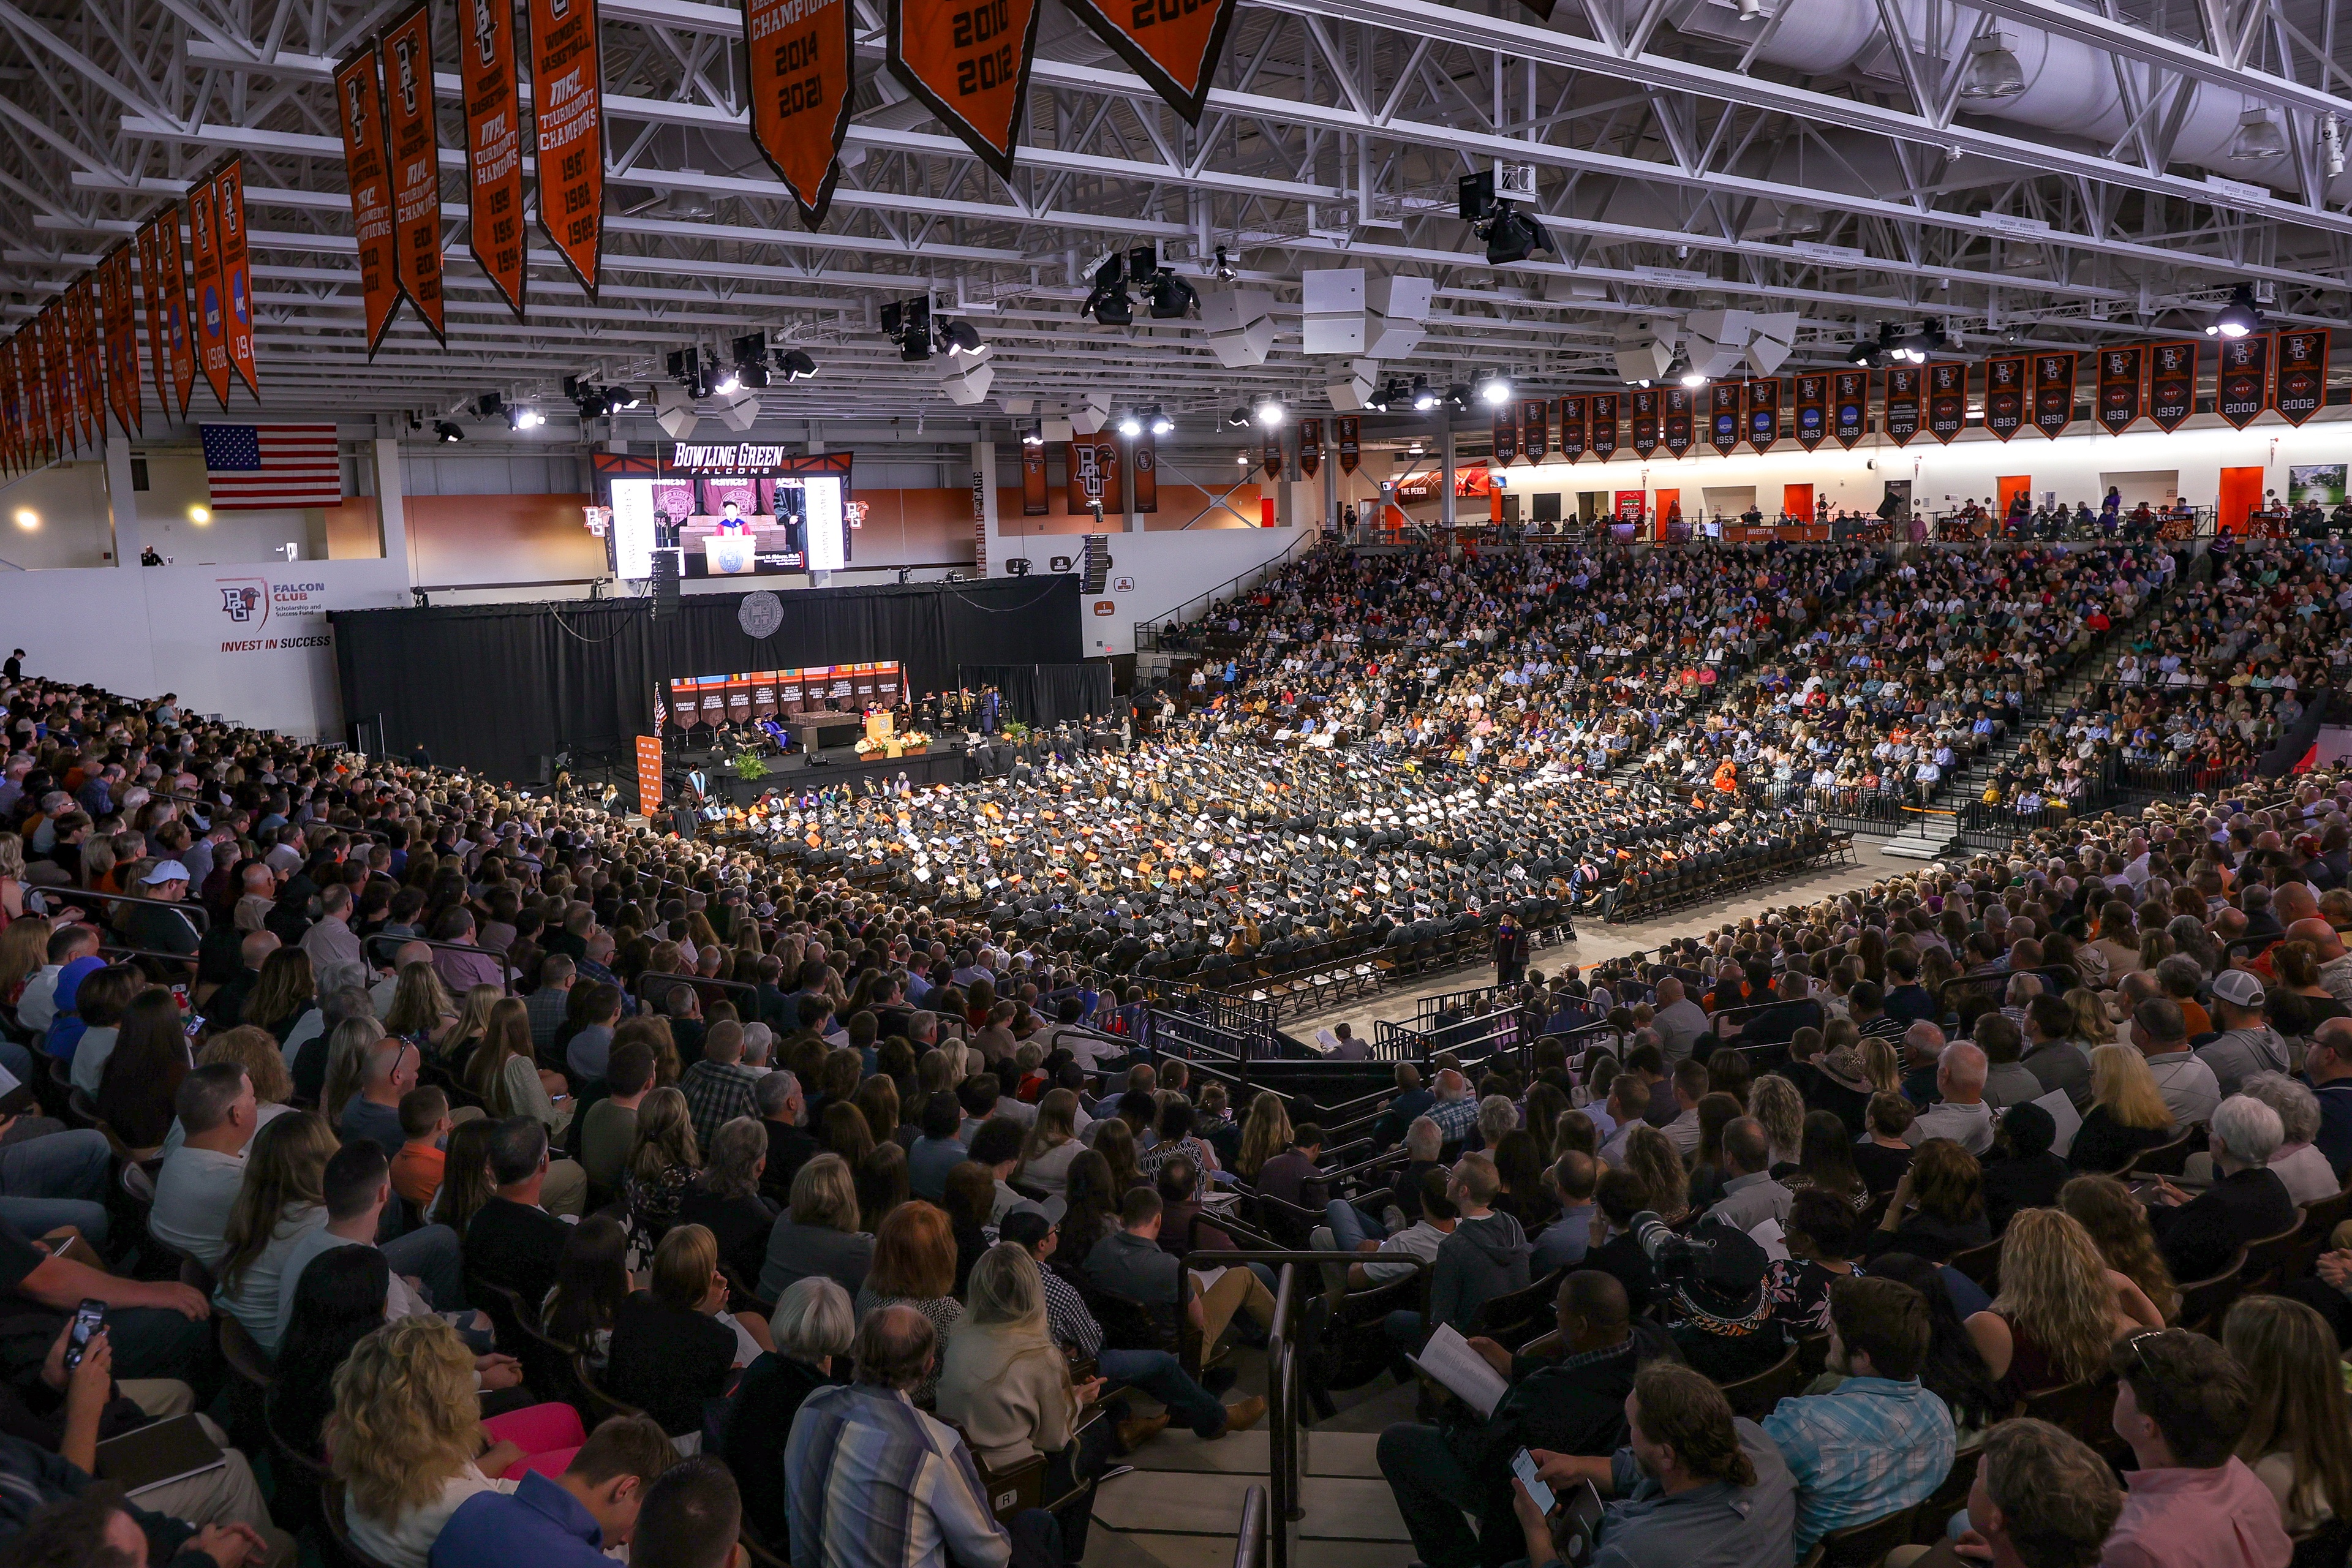 BGSU graduates and their families fill the Stroh Center for Commencement.